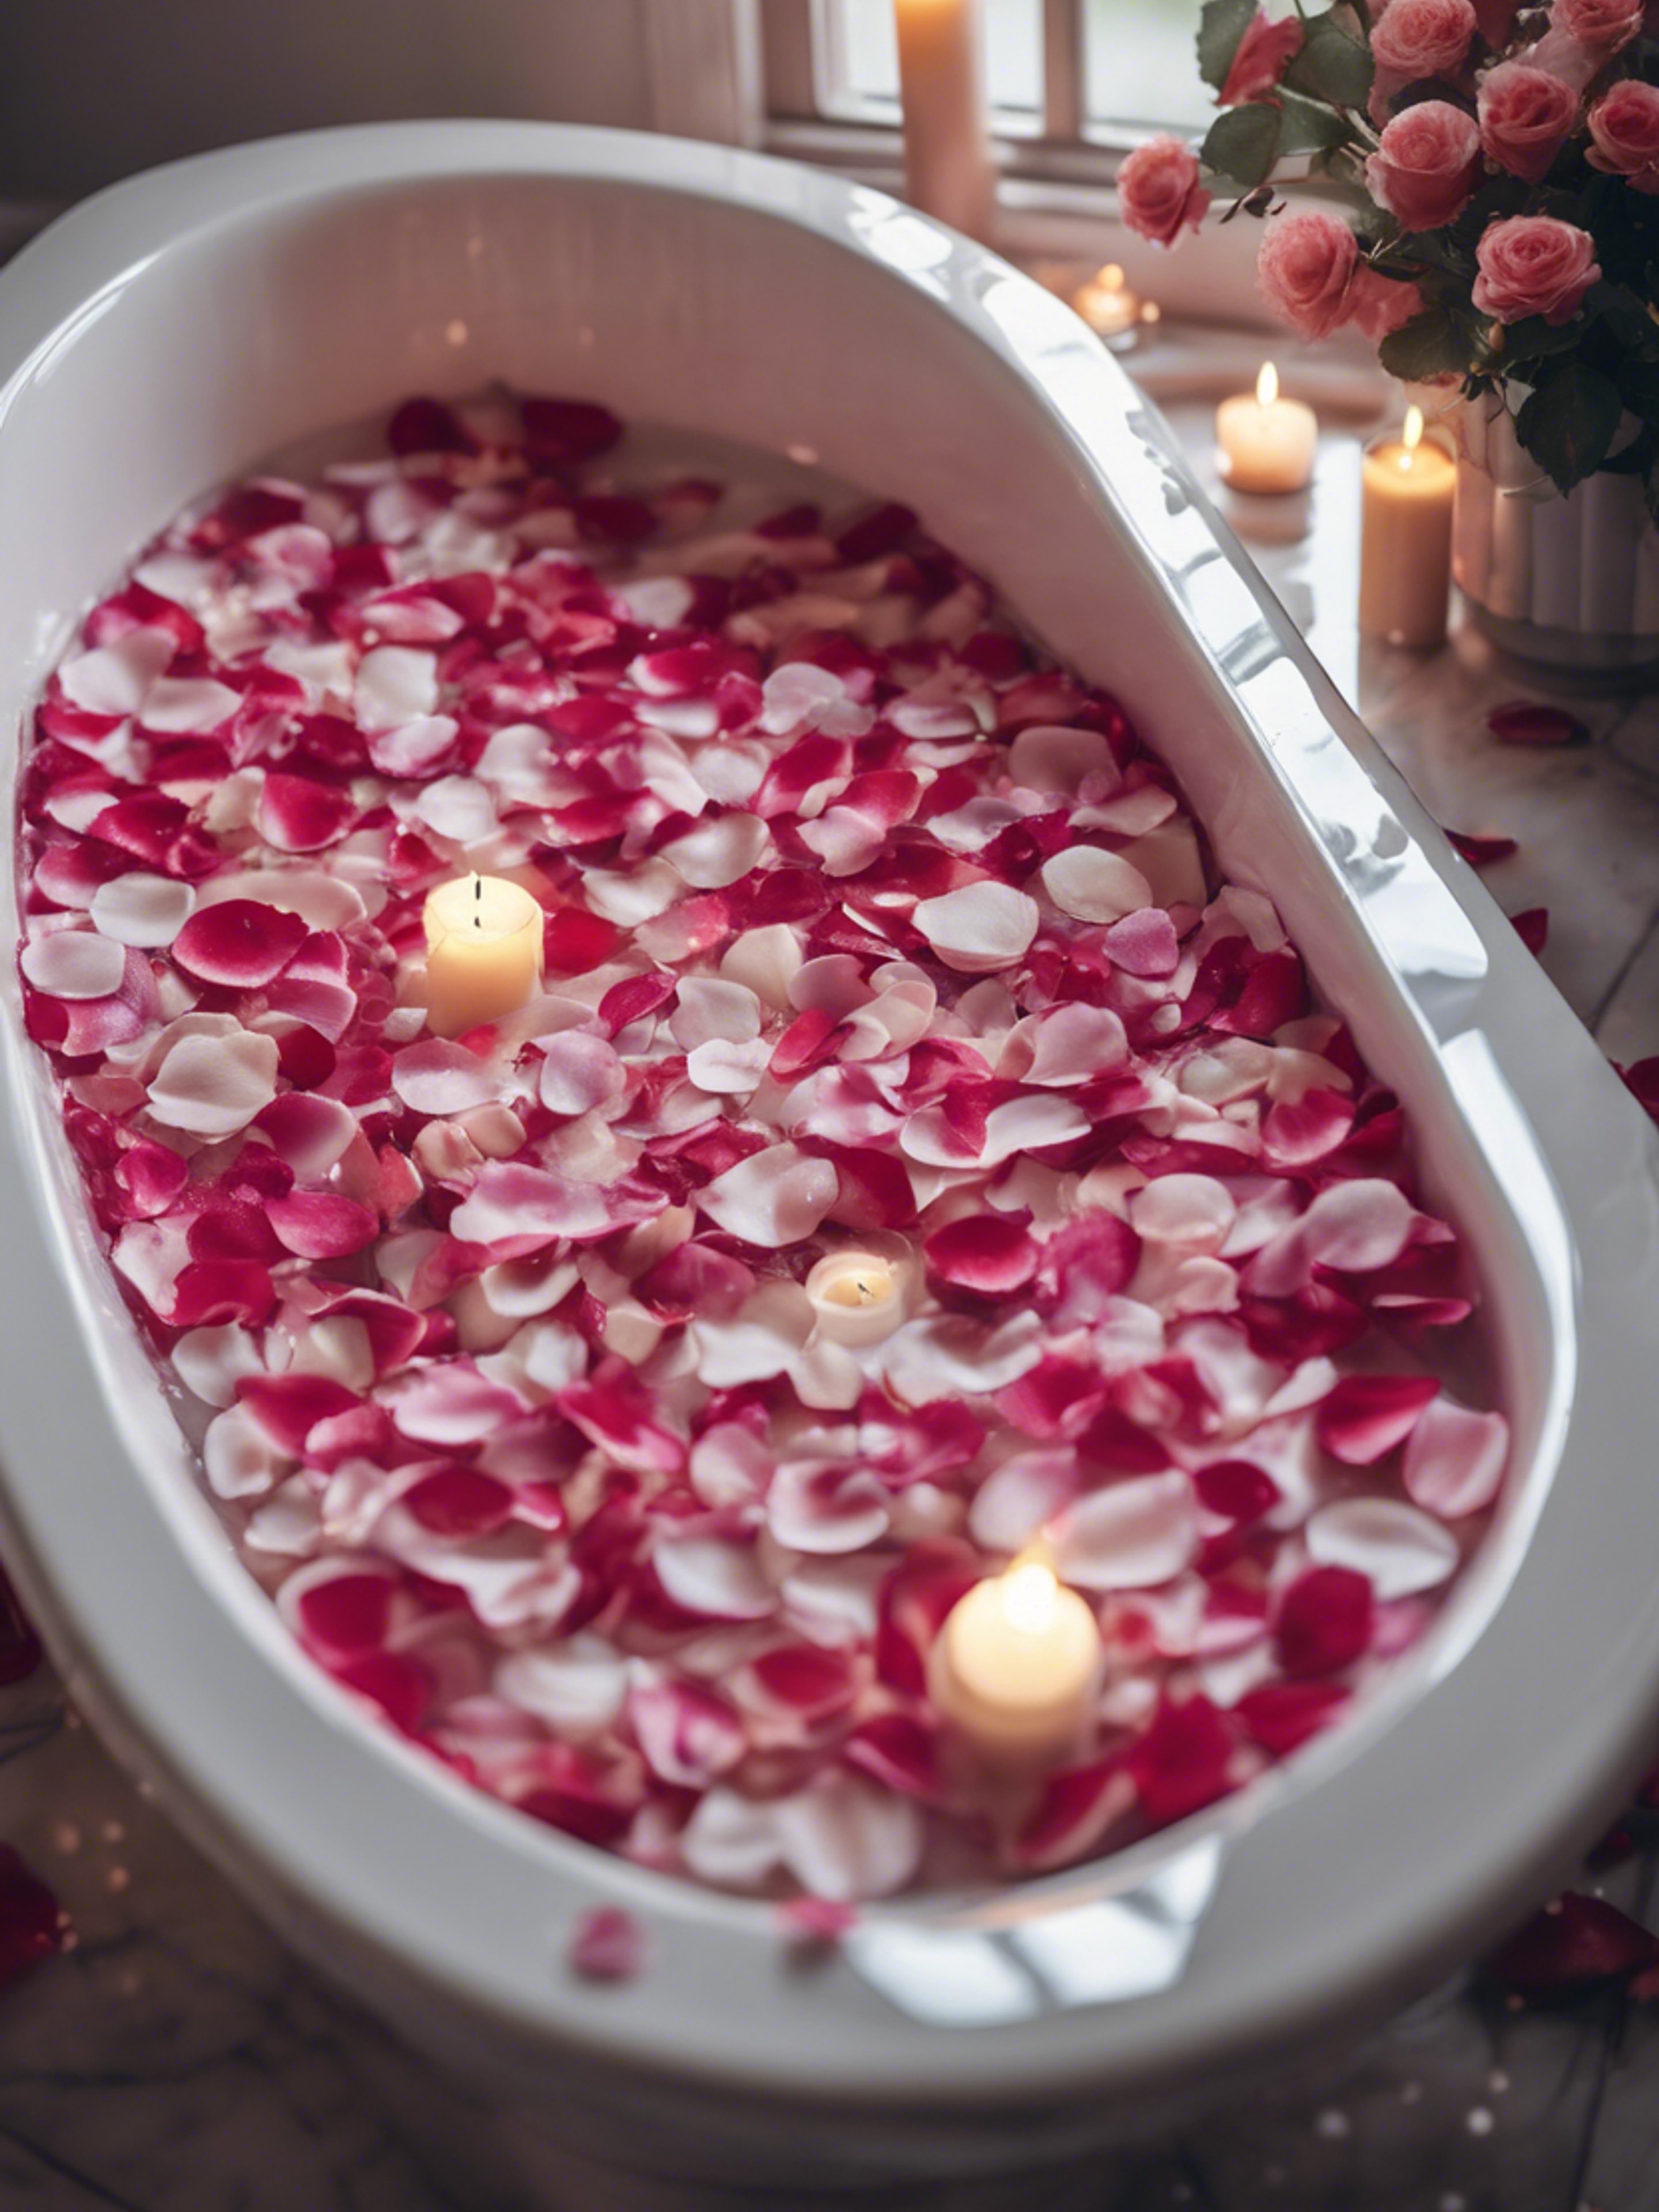 An inviting bubble bath in a white tub with rose petals and candles around the edge of the tub. Обои[29454076f2ac4acb9df8]